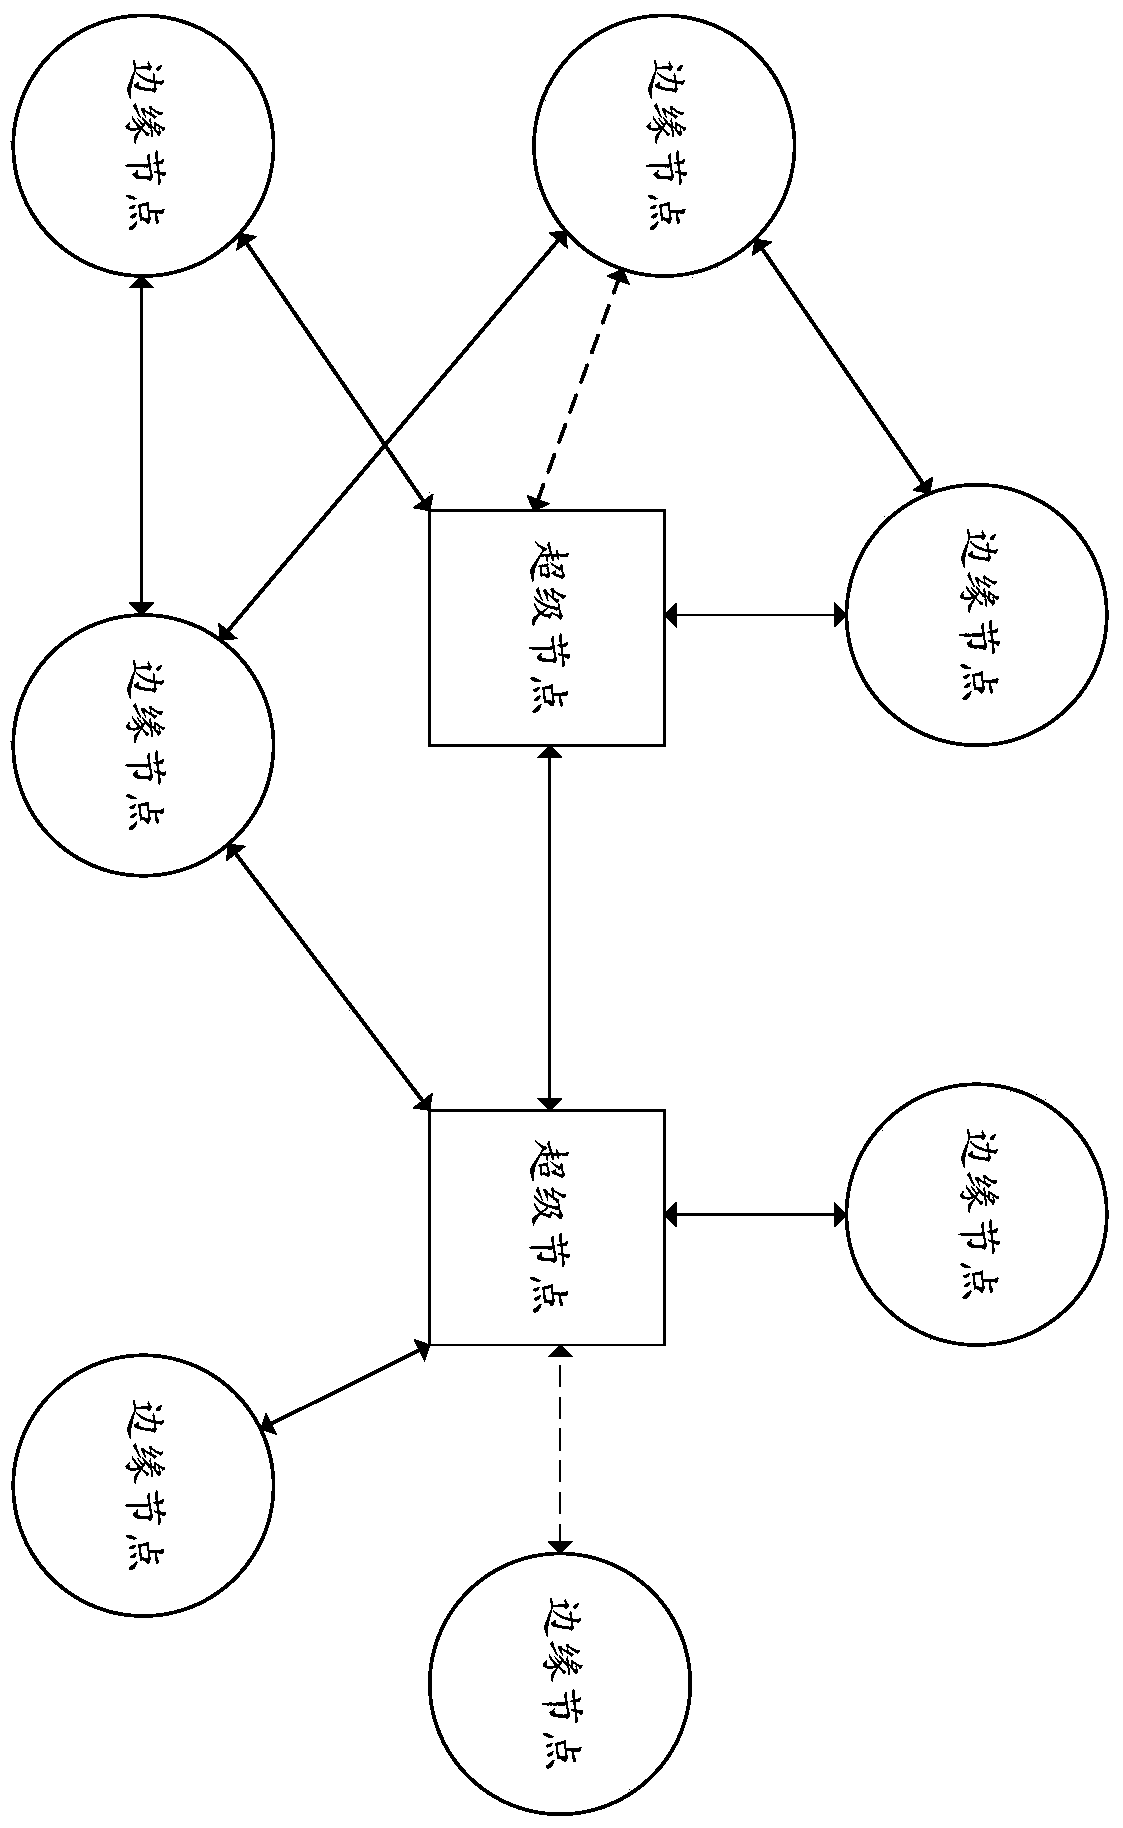 A network printing system and printing method